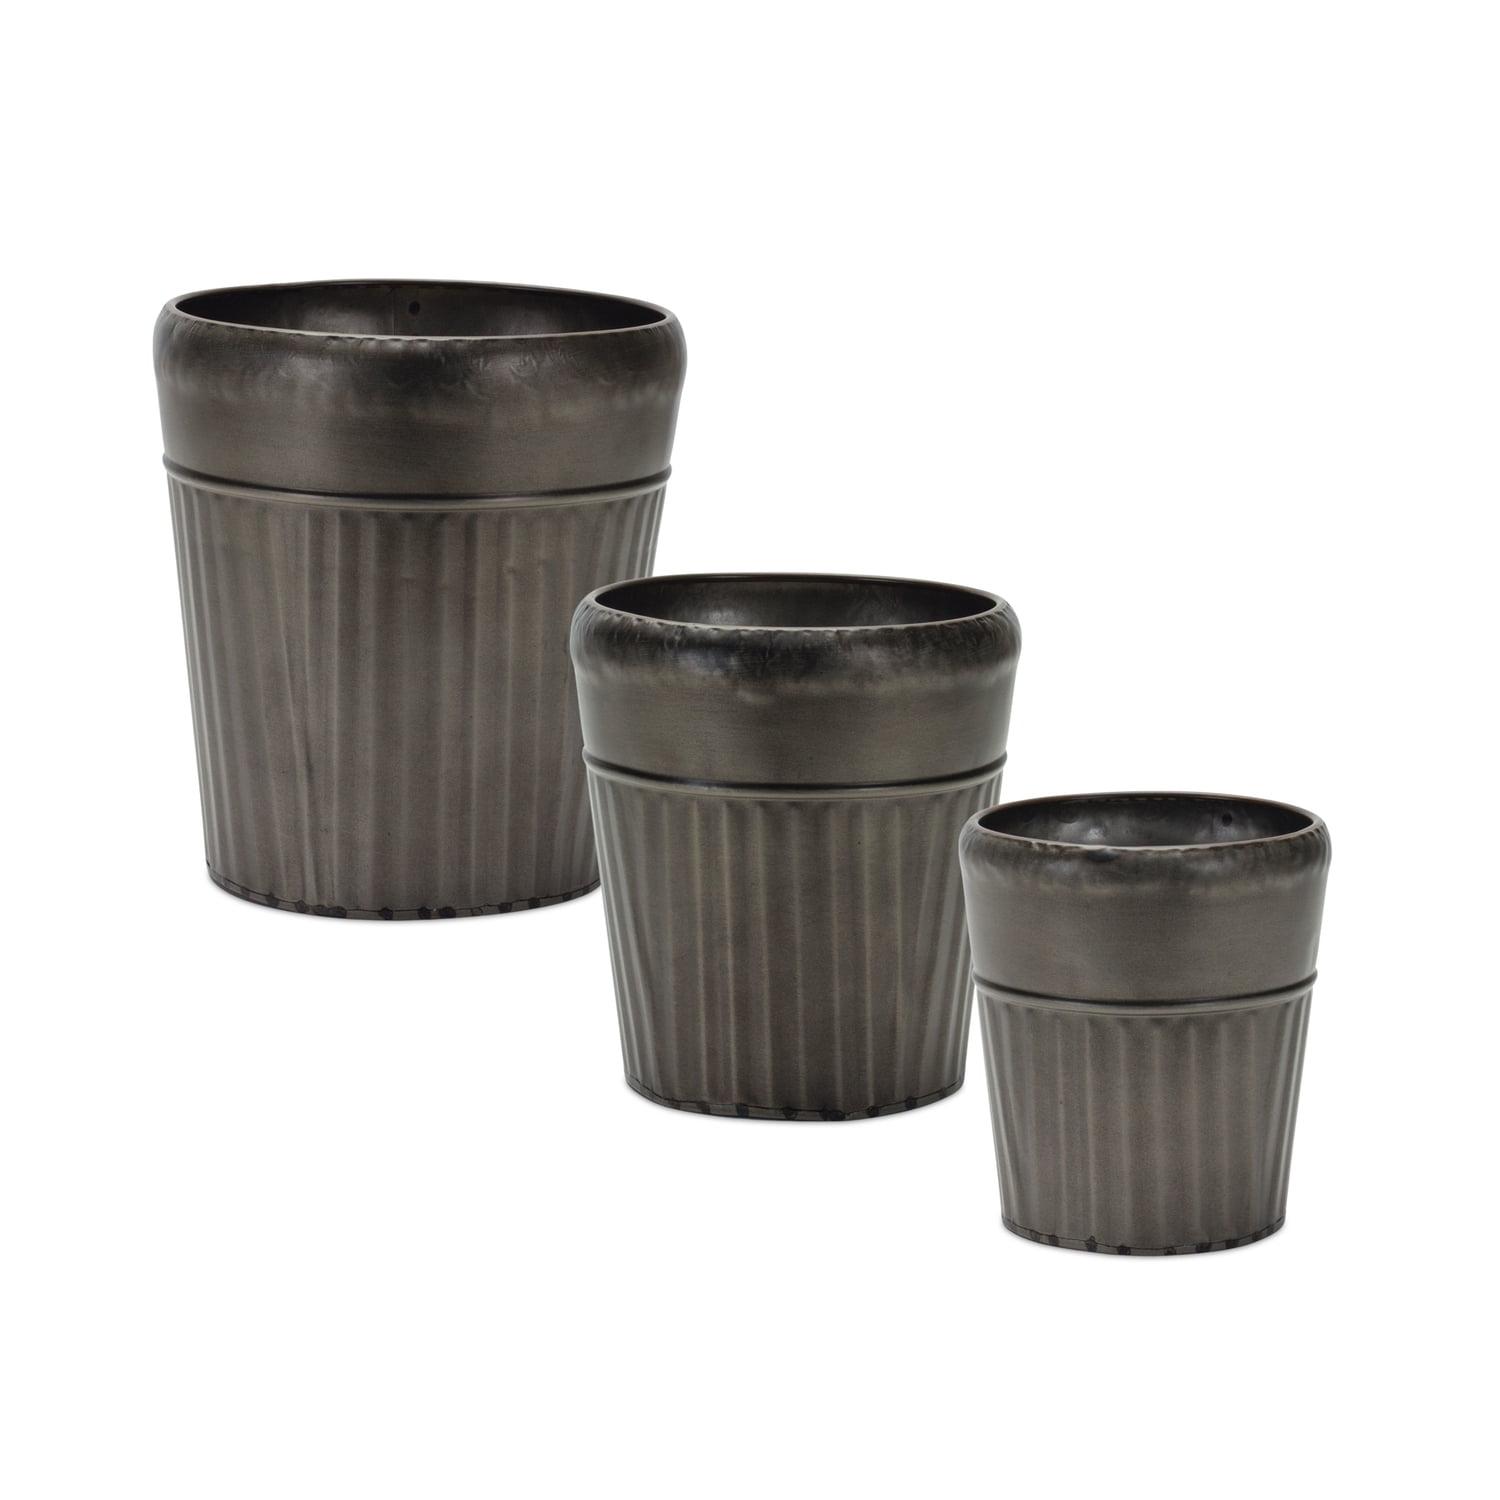 Rustic Pewter Metal Tapered Planters - Set of 3